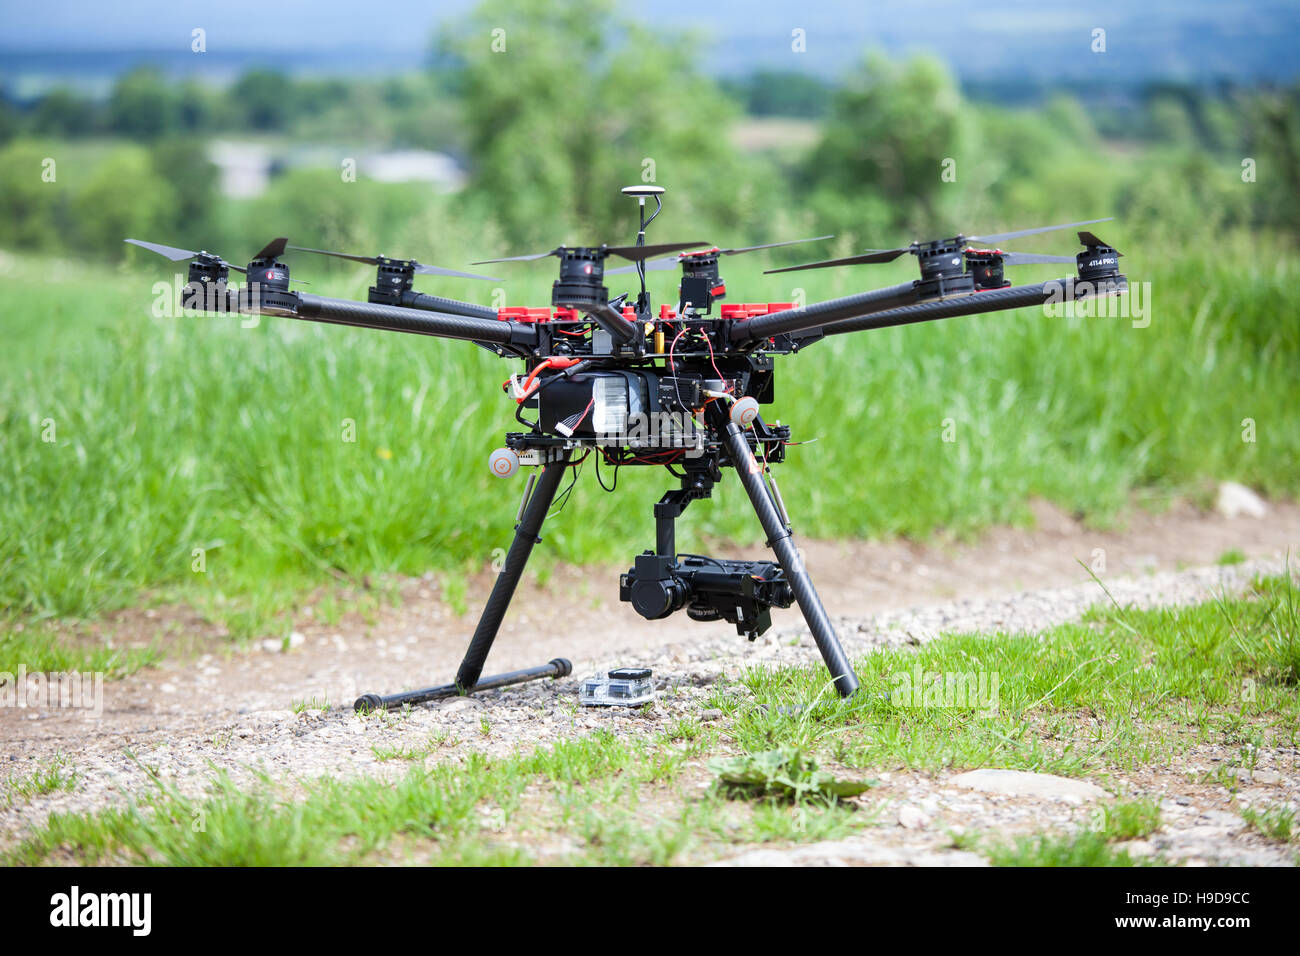 DJI S1000 Octocopter UAV drone on the ground Stock Photo